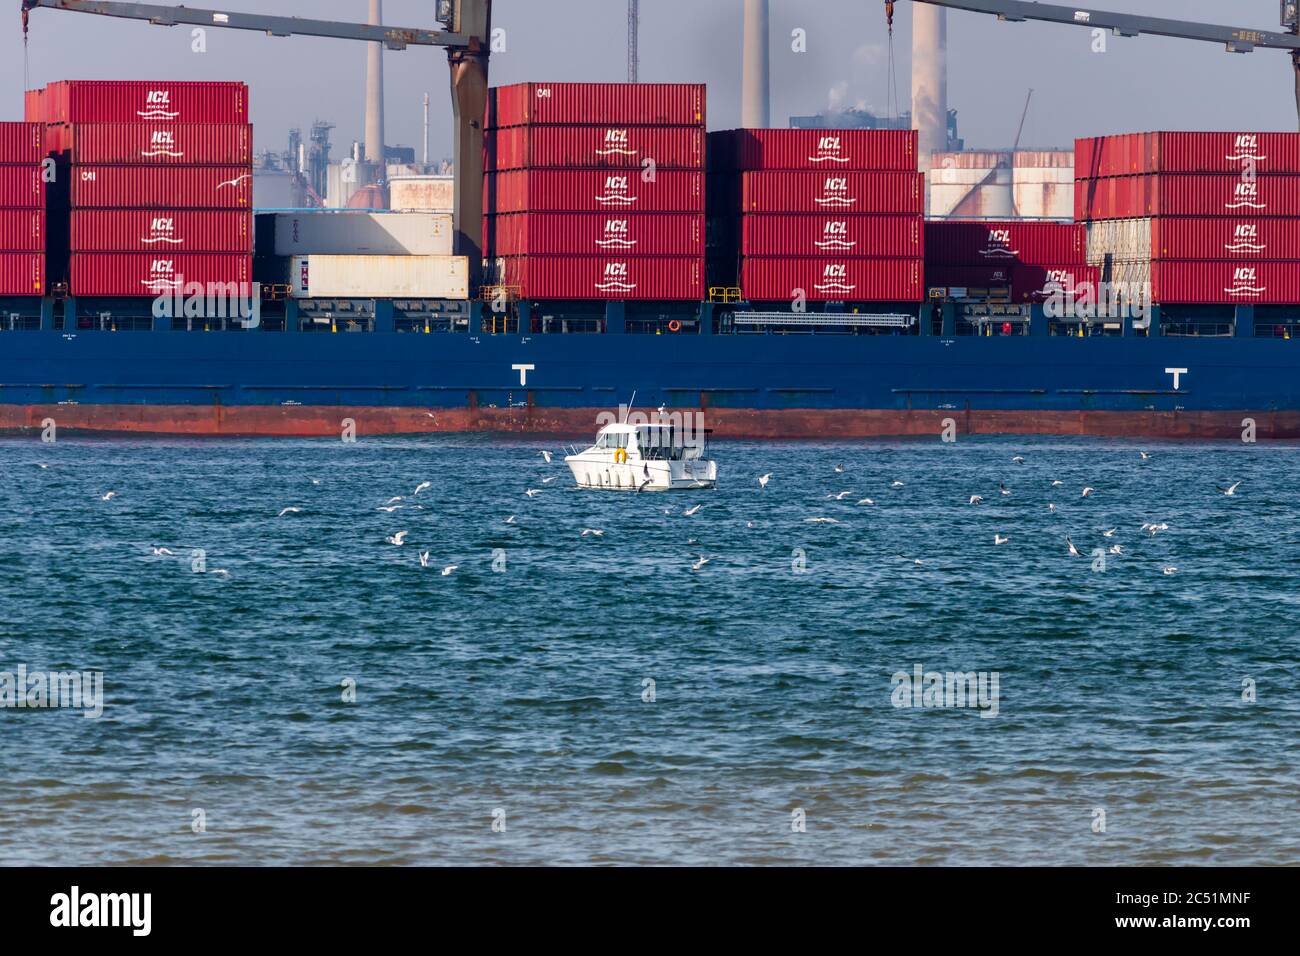 https://c8.alamy.com/comp/2C51MNF/small-fishing-boat-with-big-container-ship-behind-it-2C51MNF.jpg